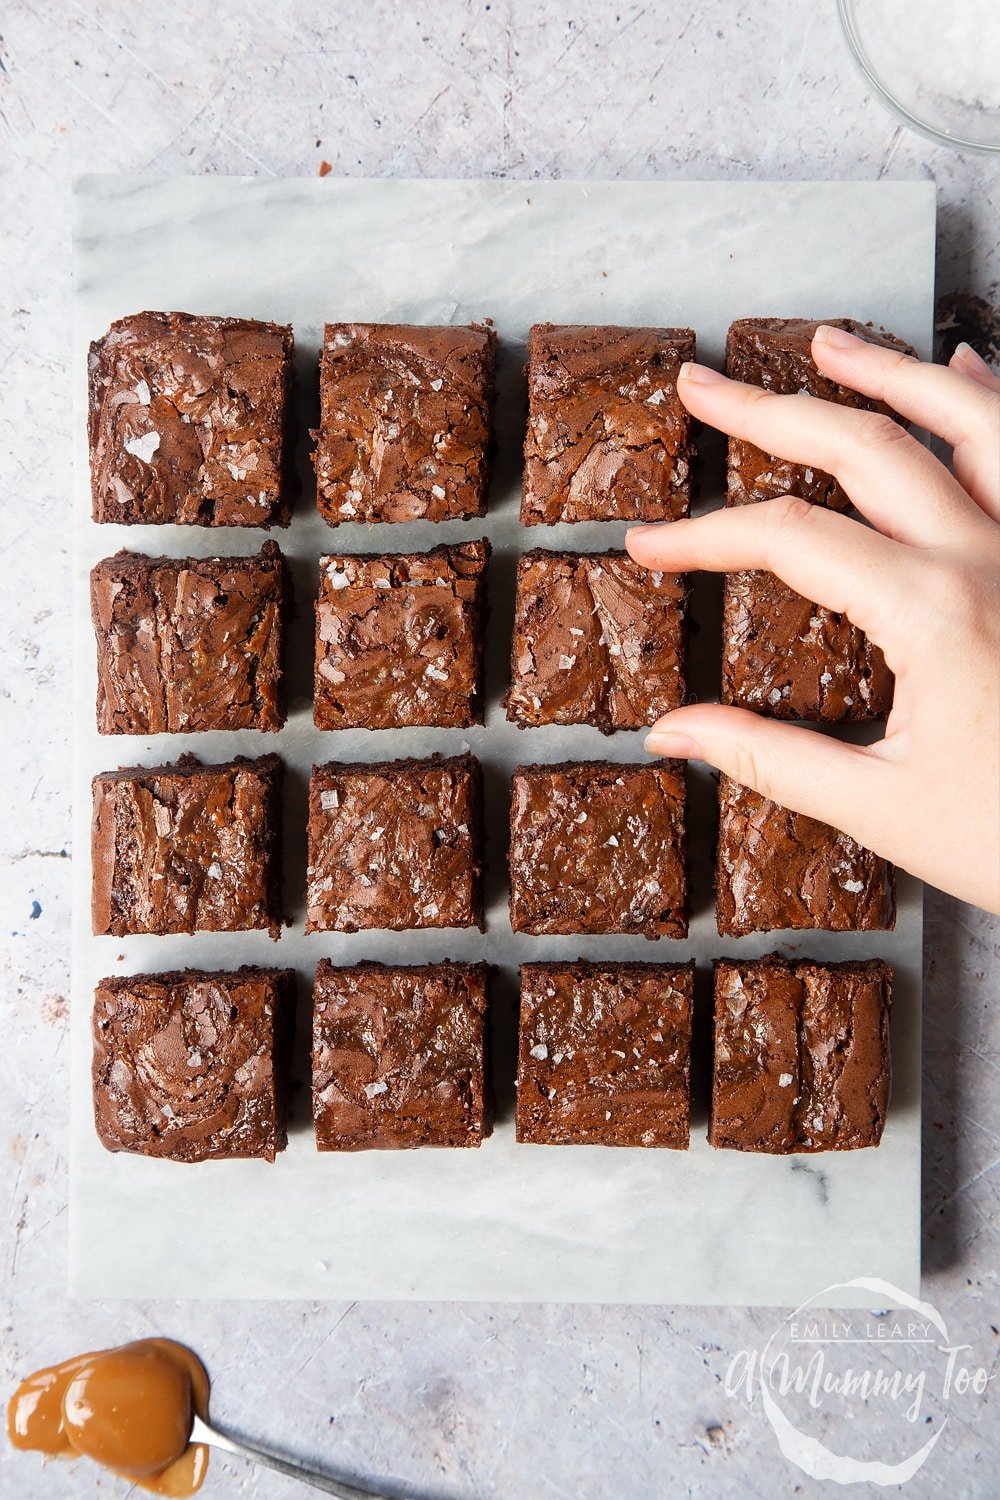 Finished slices of gooey salted caramel brownies ready to be  shared and enjoyed.